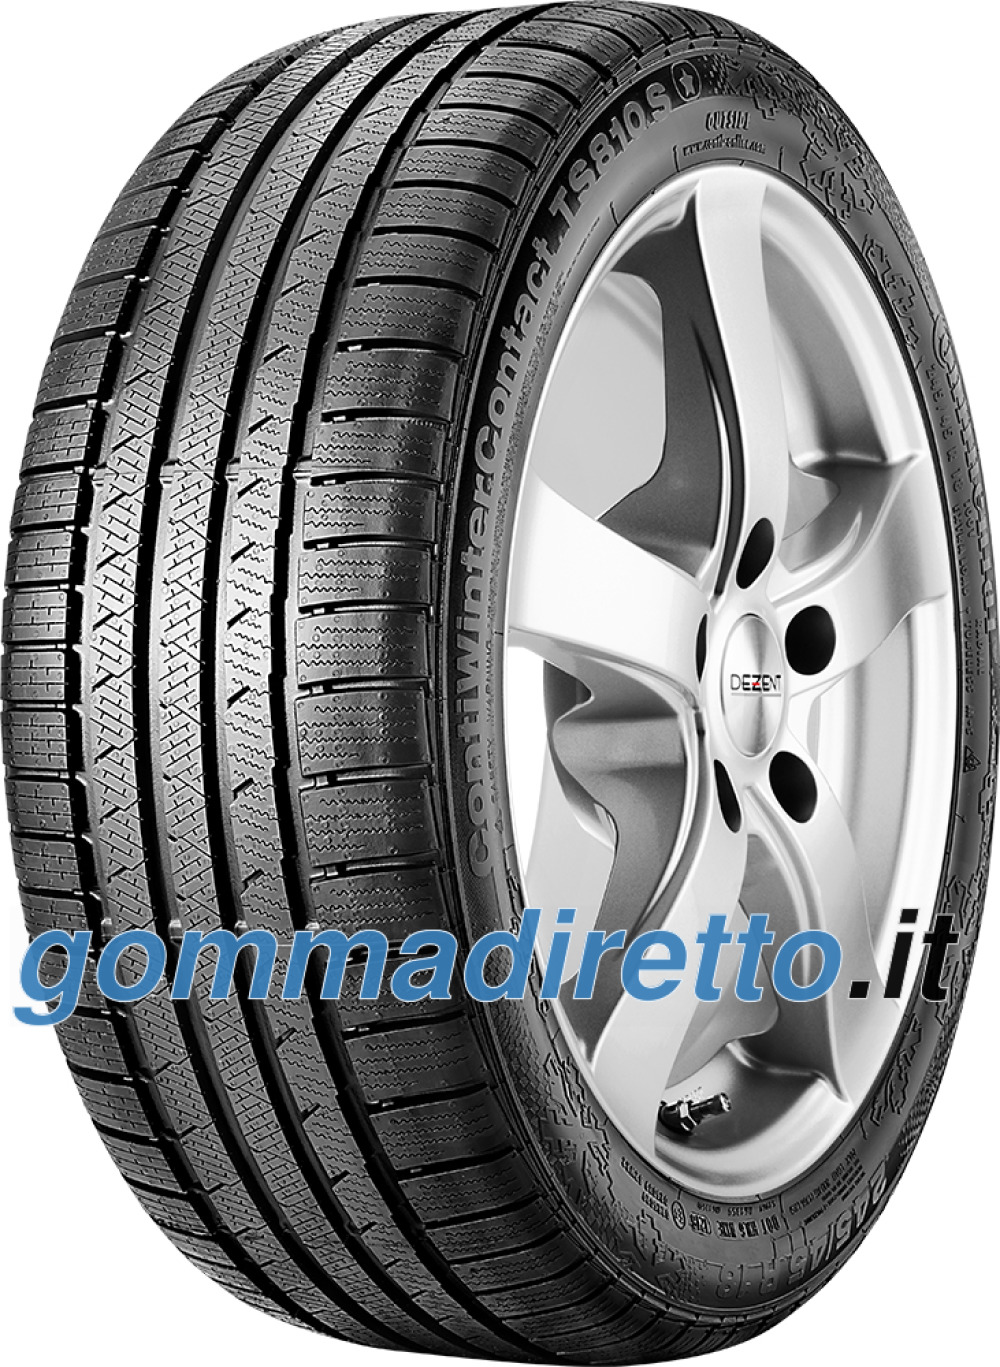 Image of Continental ContiWinterContact TS 810 S ( 205/55 R17 95V XL, N2 )